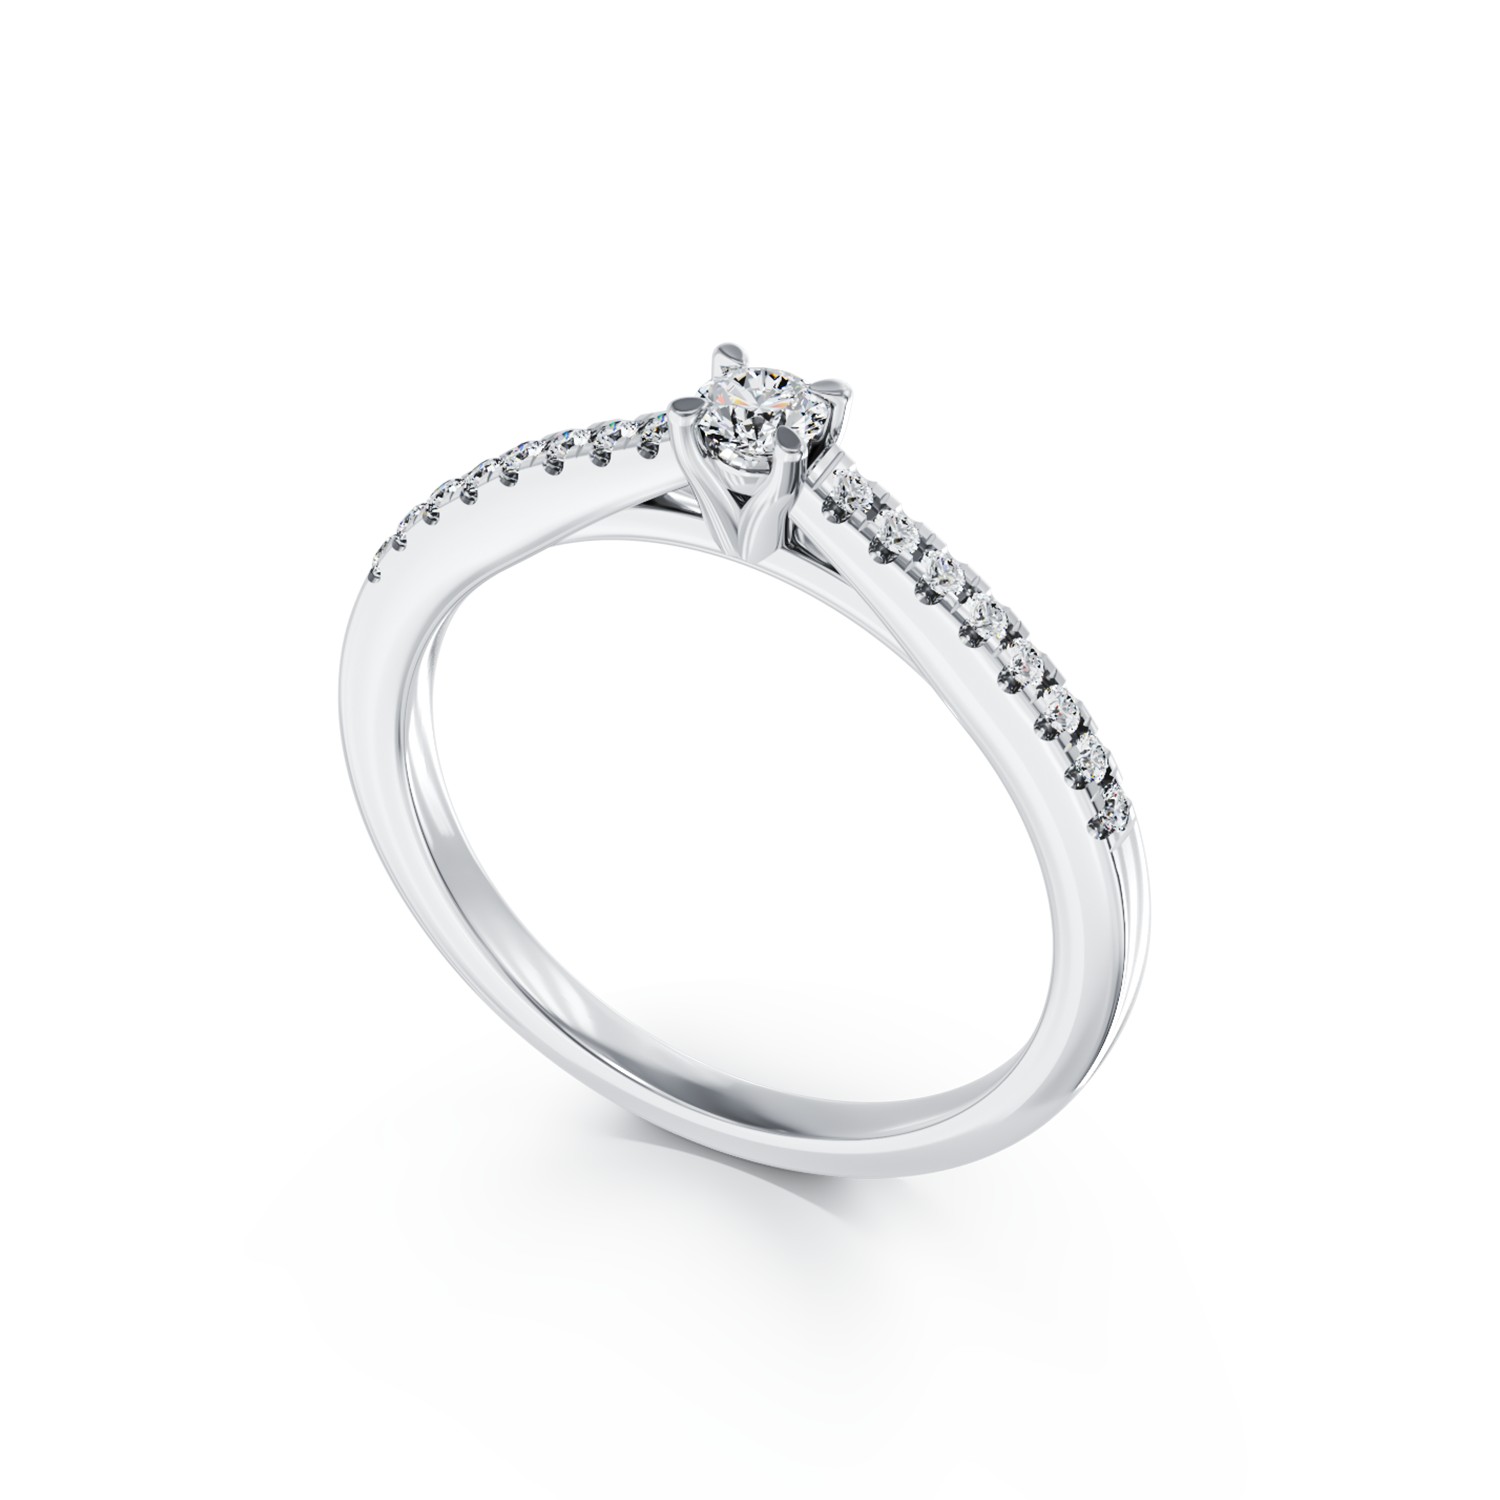 White gold engagement ring with 0.2ct diamonds